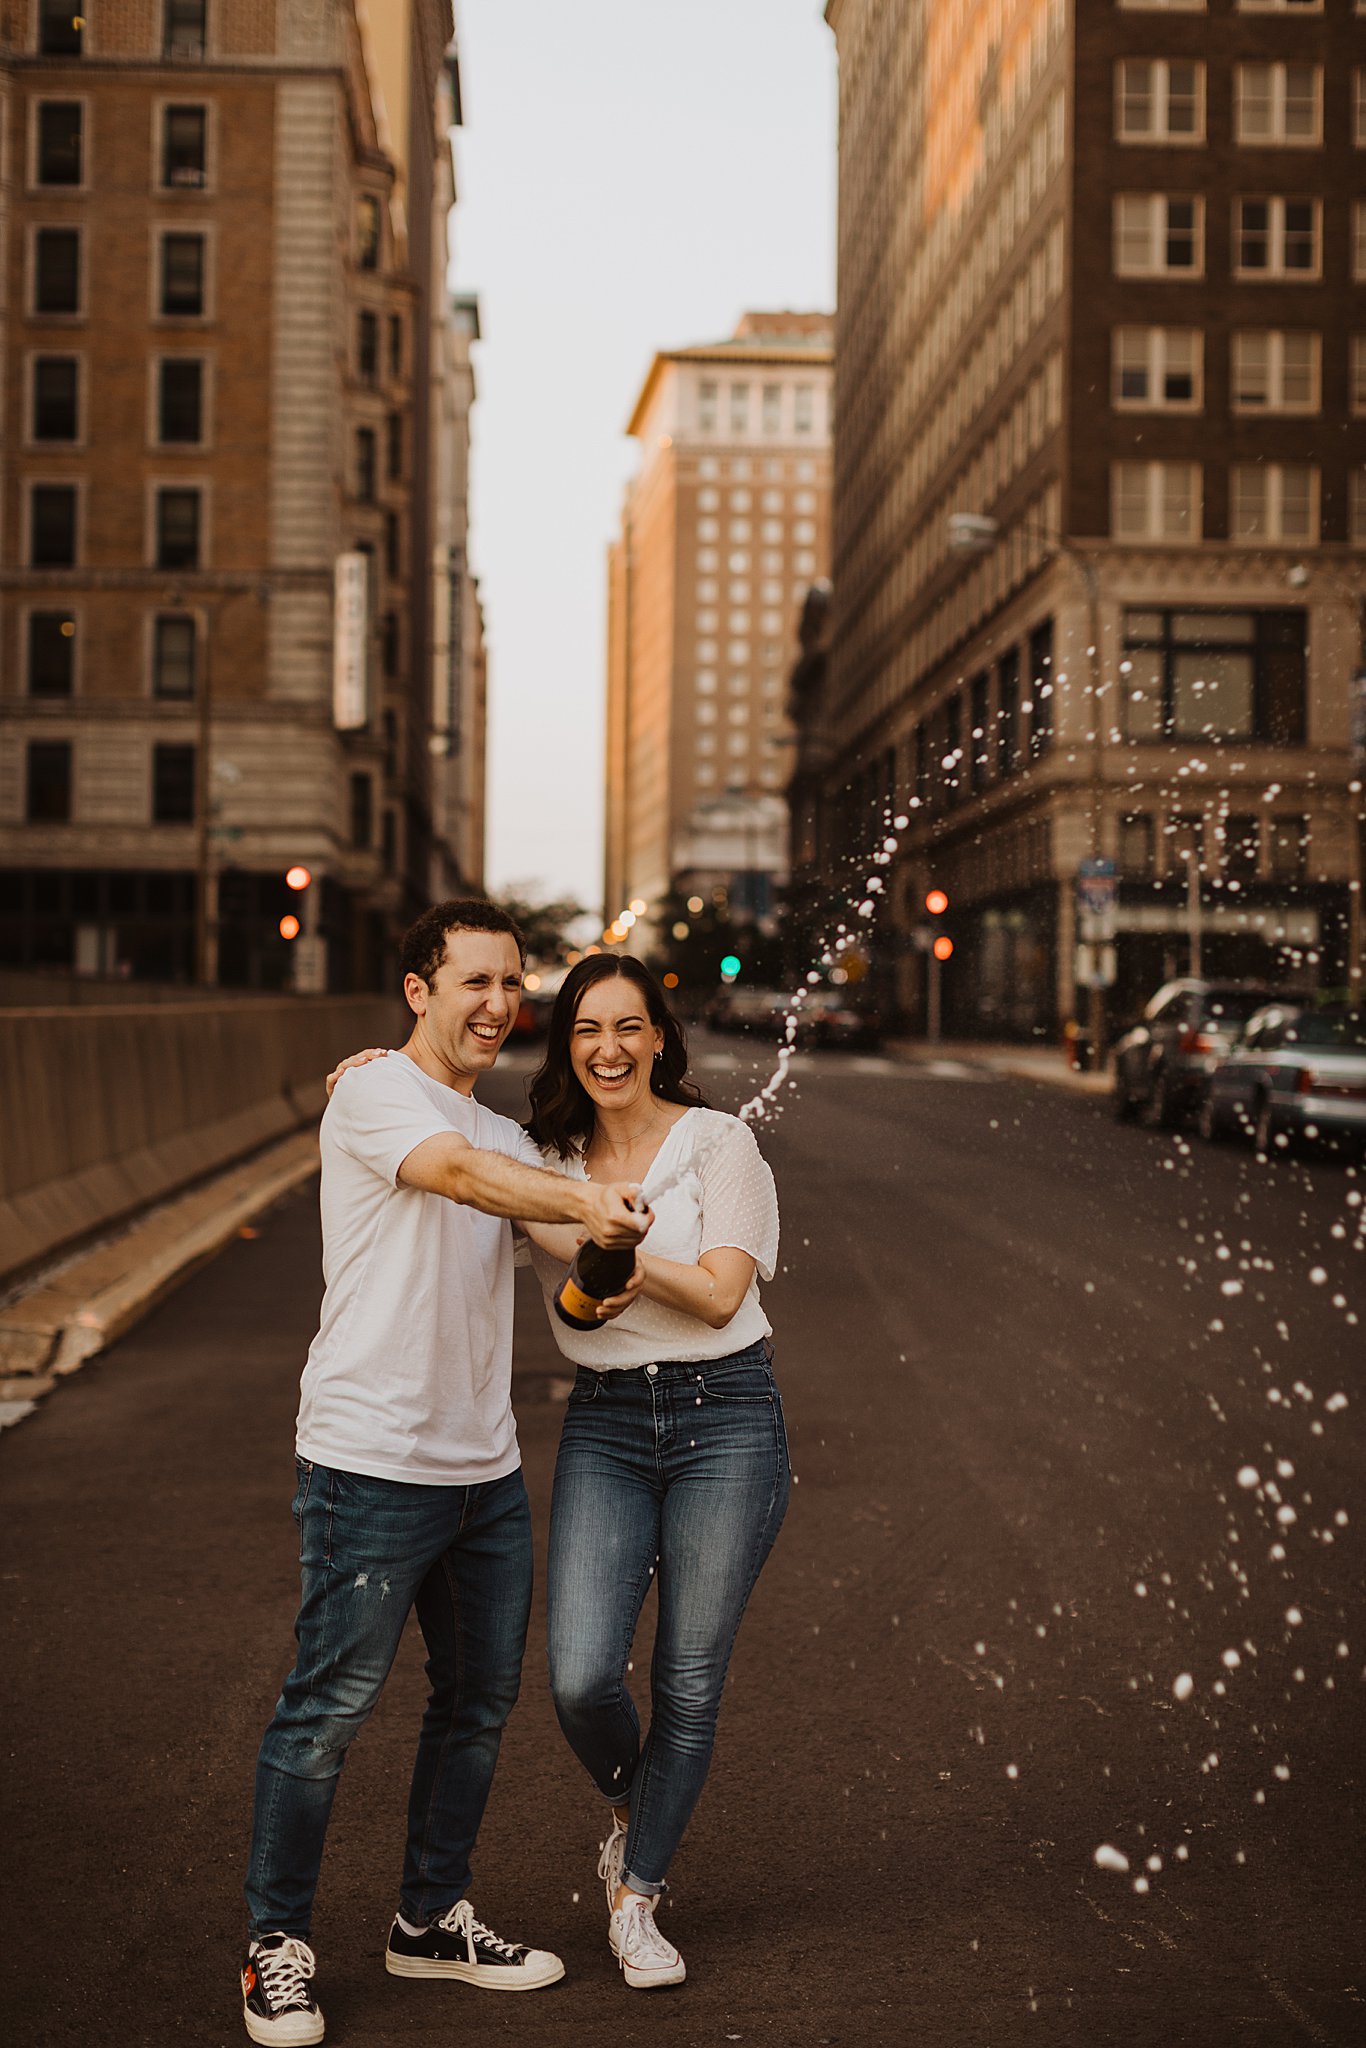 Couple popping champagne | Engagement photo ideas